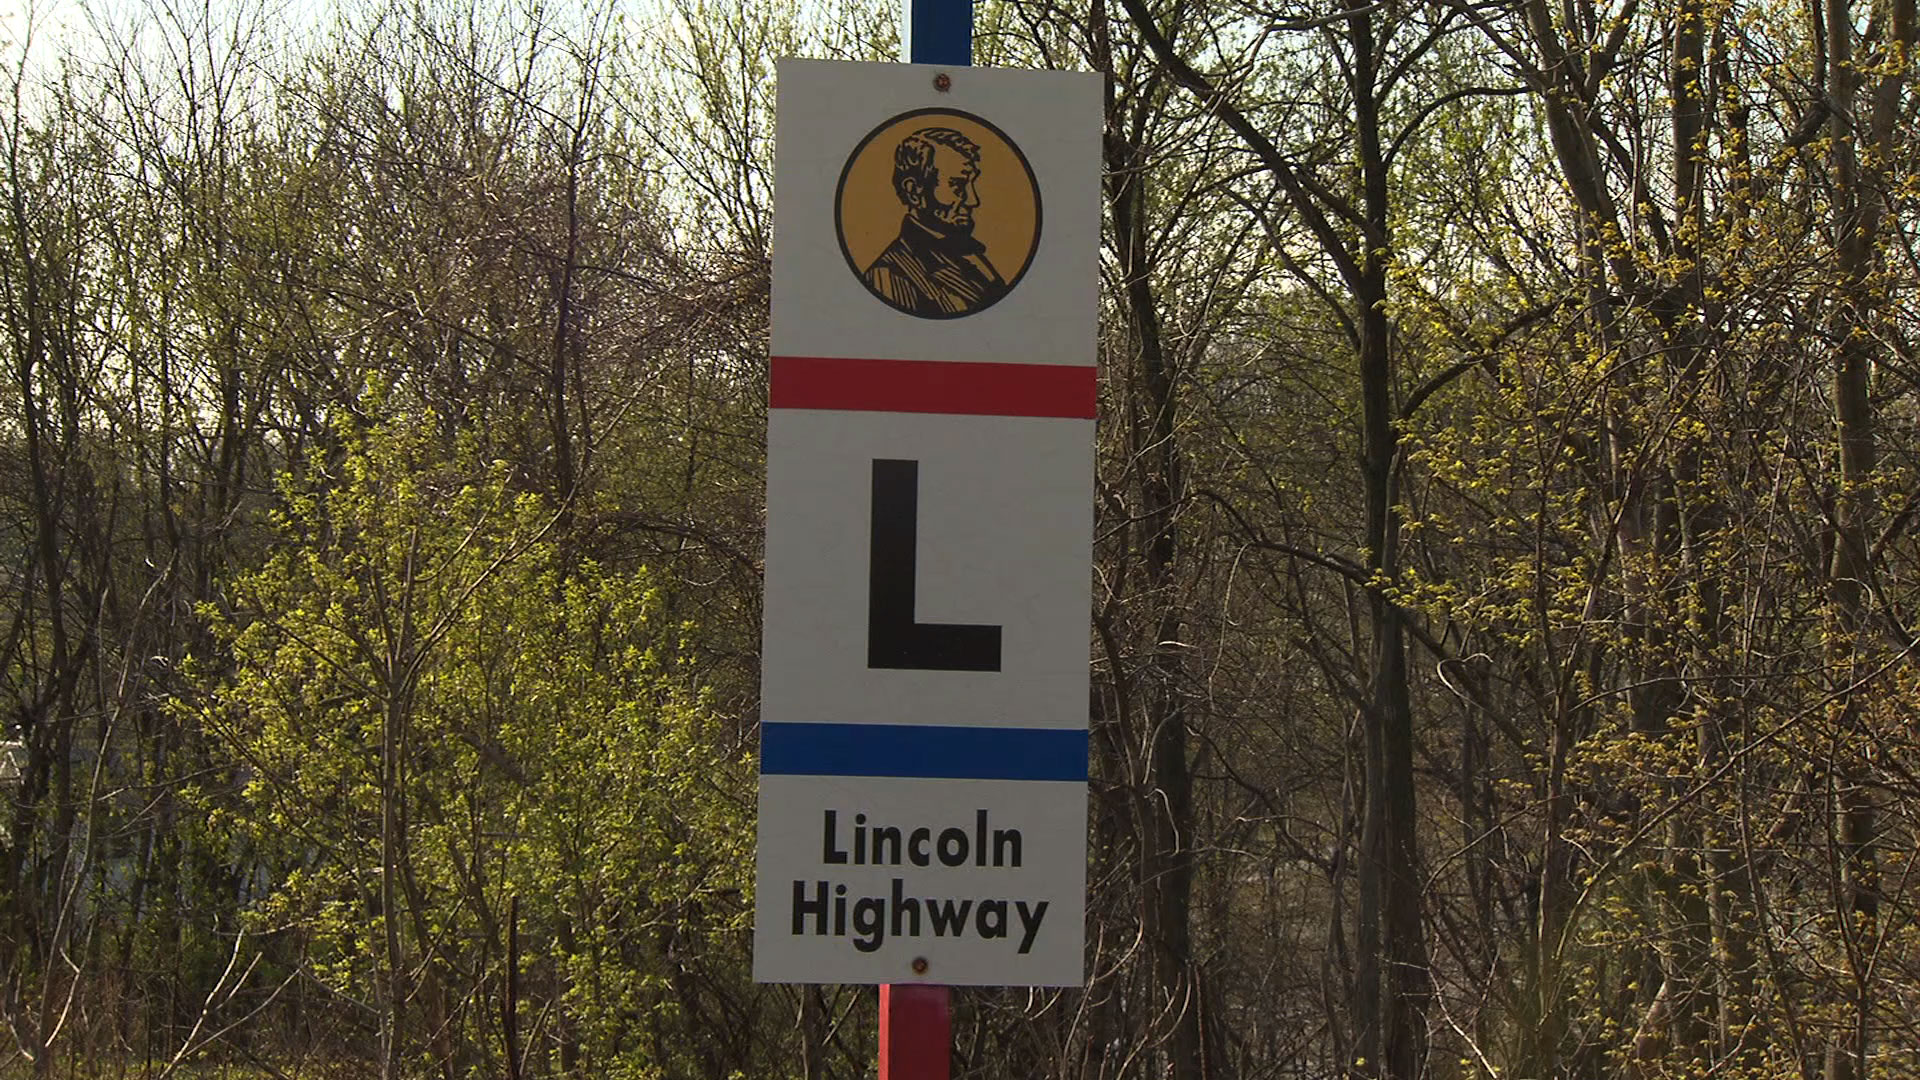 Lincoln Highway road sign